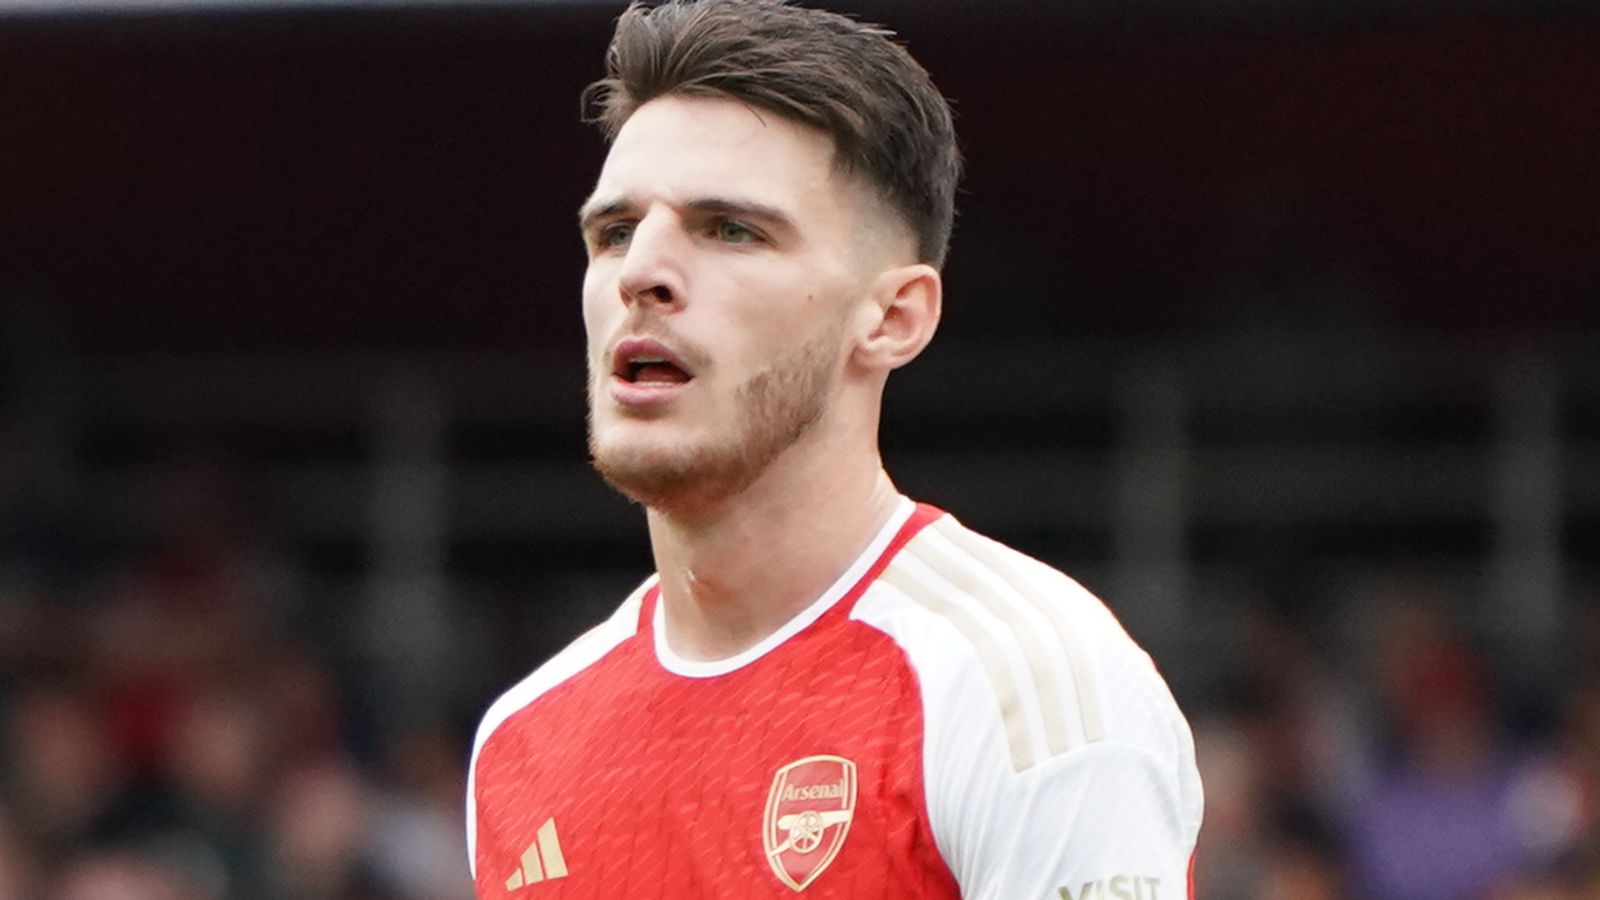 Arsenal midfielder Declan Rice expected to be fit to face Manchester City after avoiding serious injury